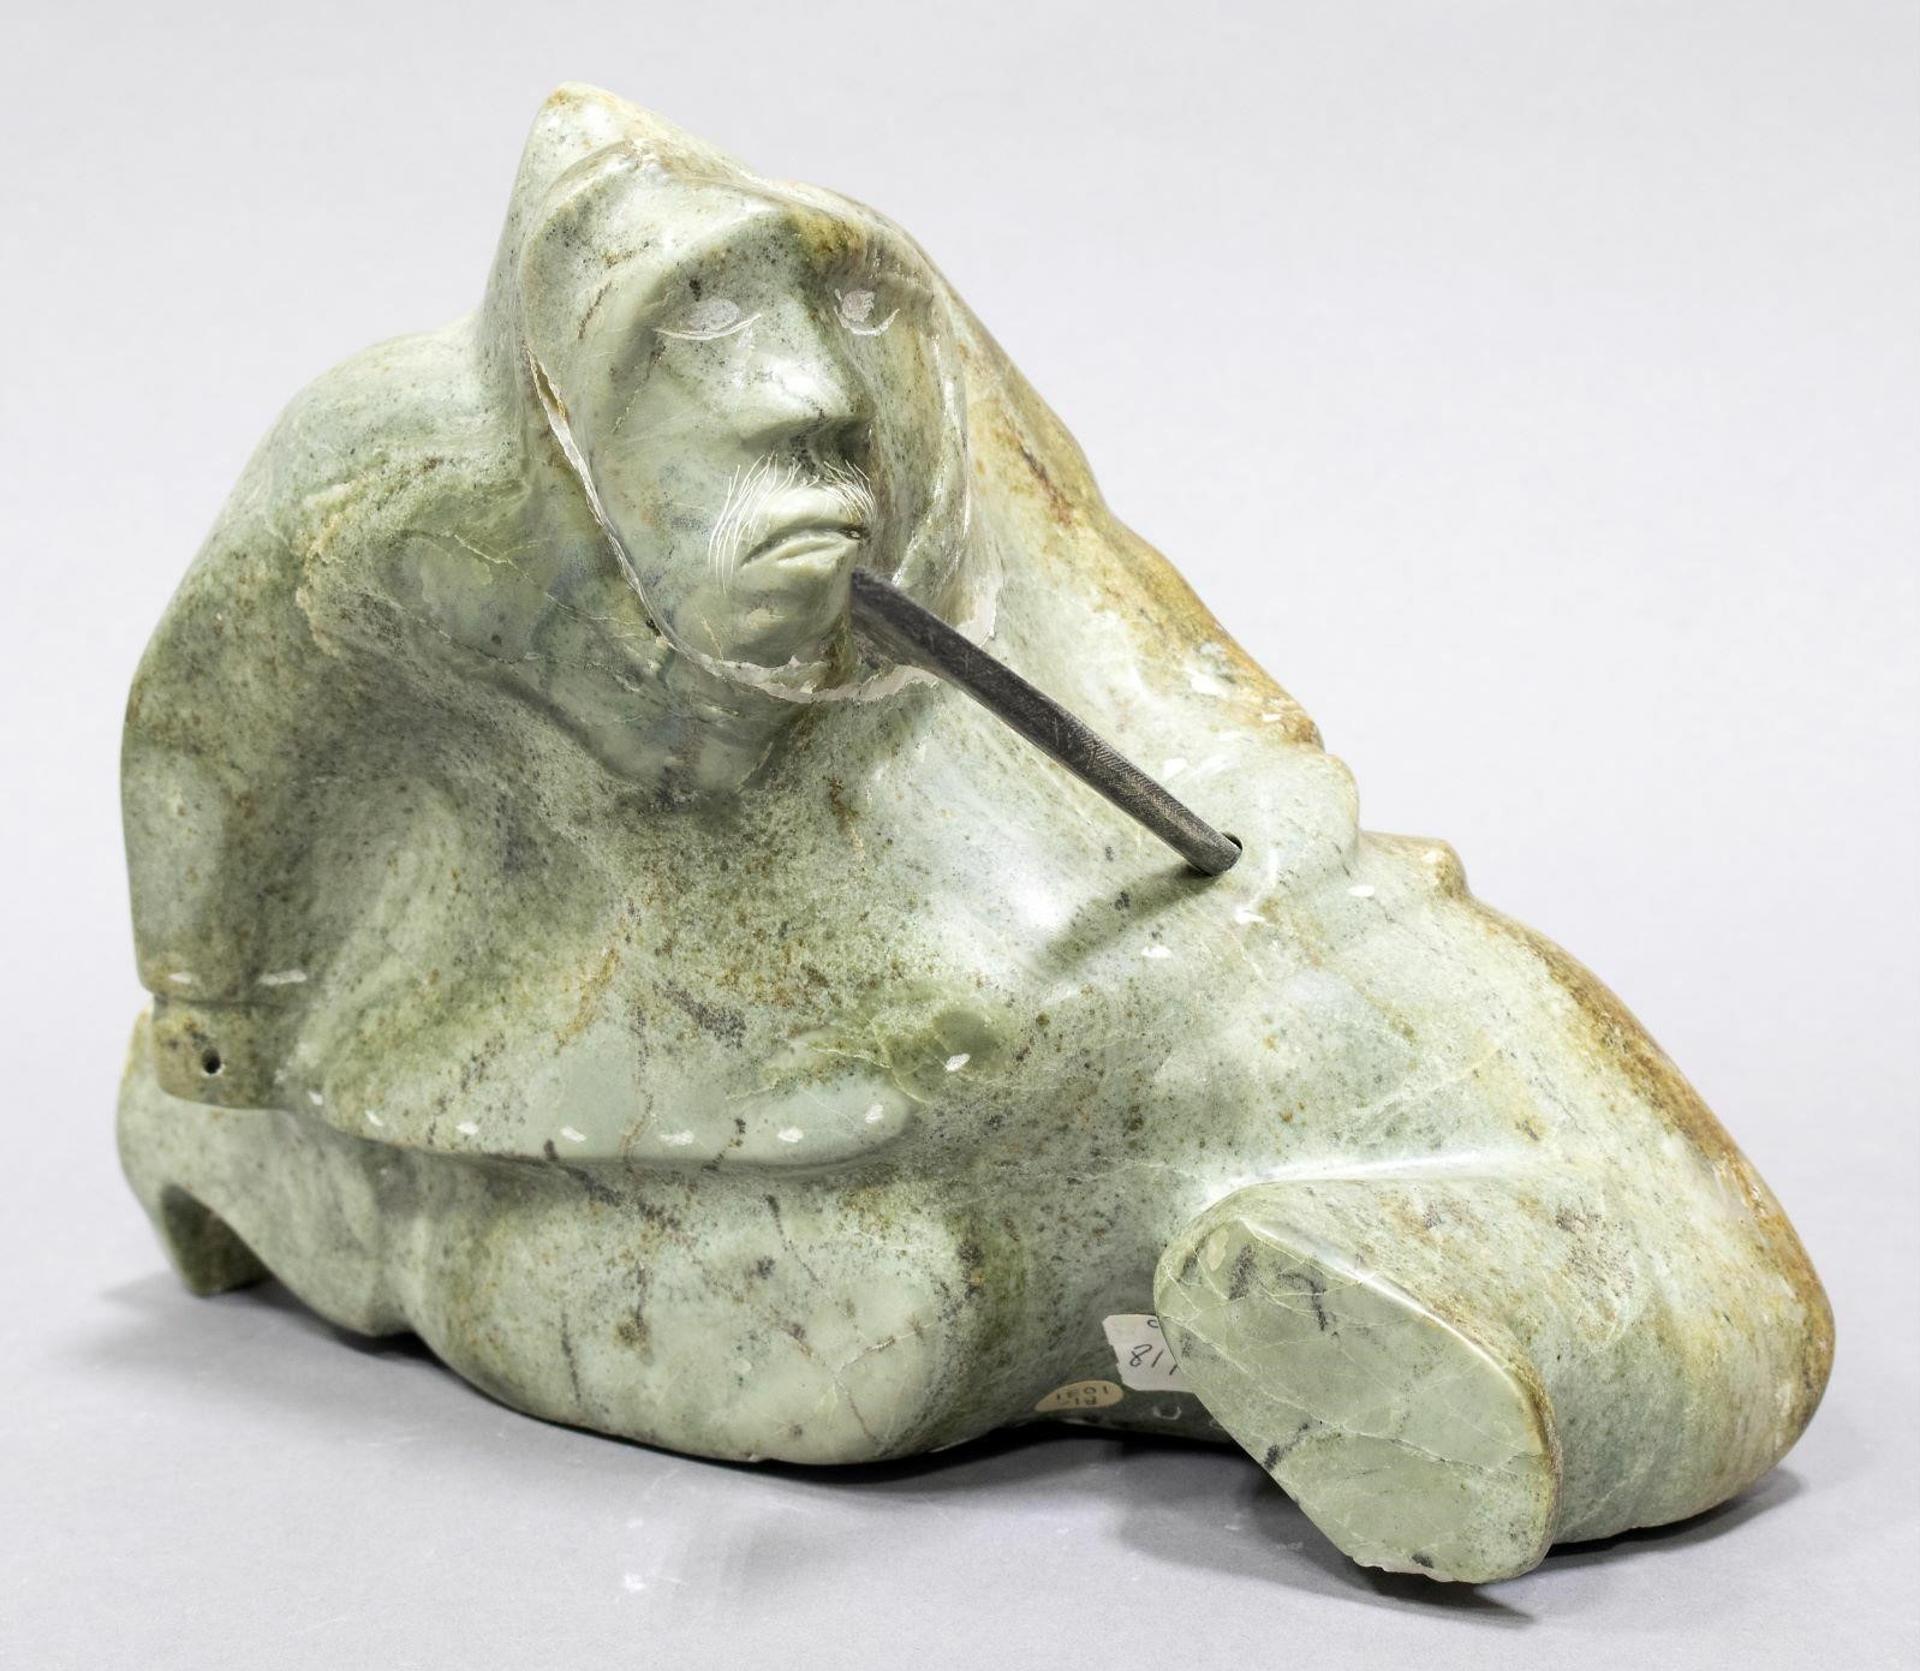 Davidee Kavik (1915) - a green-orange stone carving of a Fisherman with Spear (baleen)